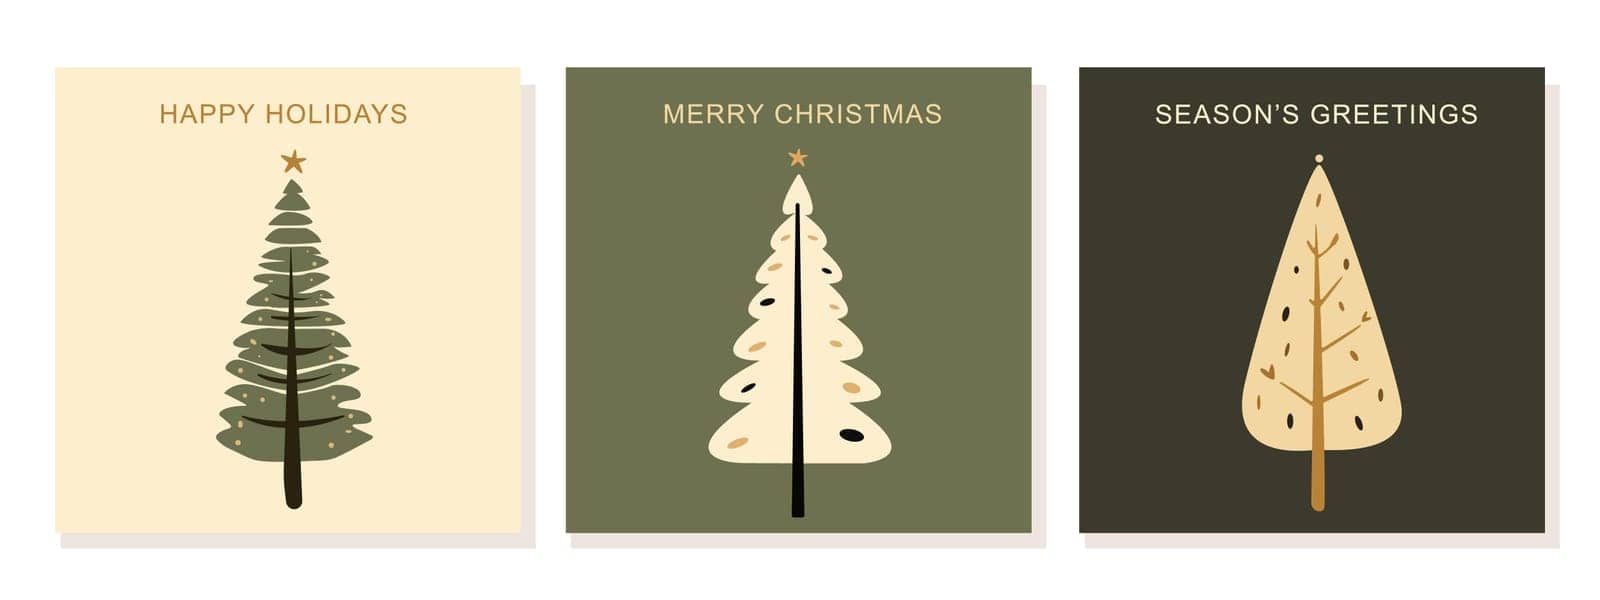 Modern universal art templates. Merry Christmas. Holiday cards and invitations with hand drawn Christmas trees. Vector illustration by Vovmar